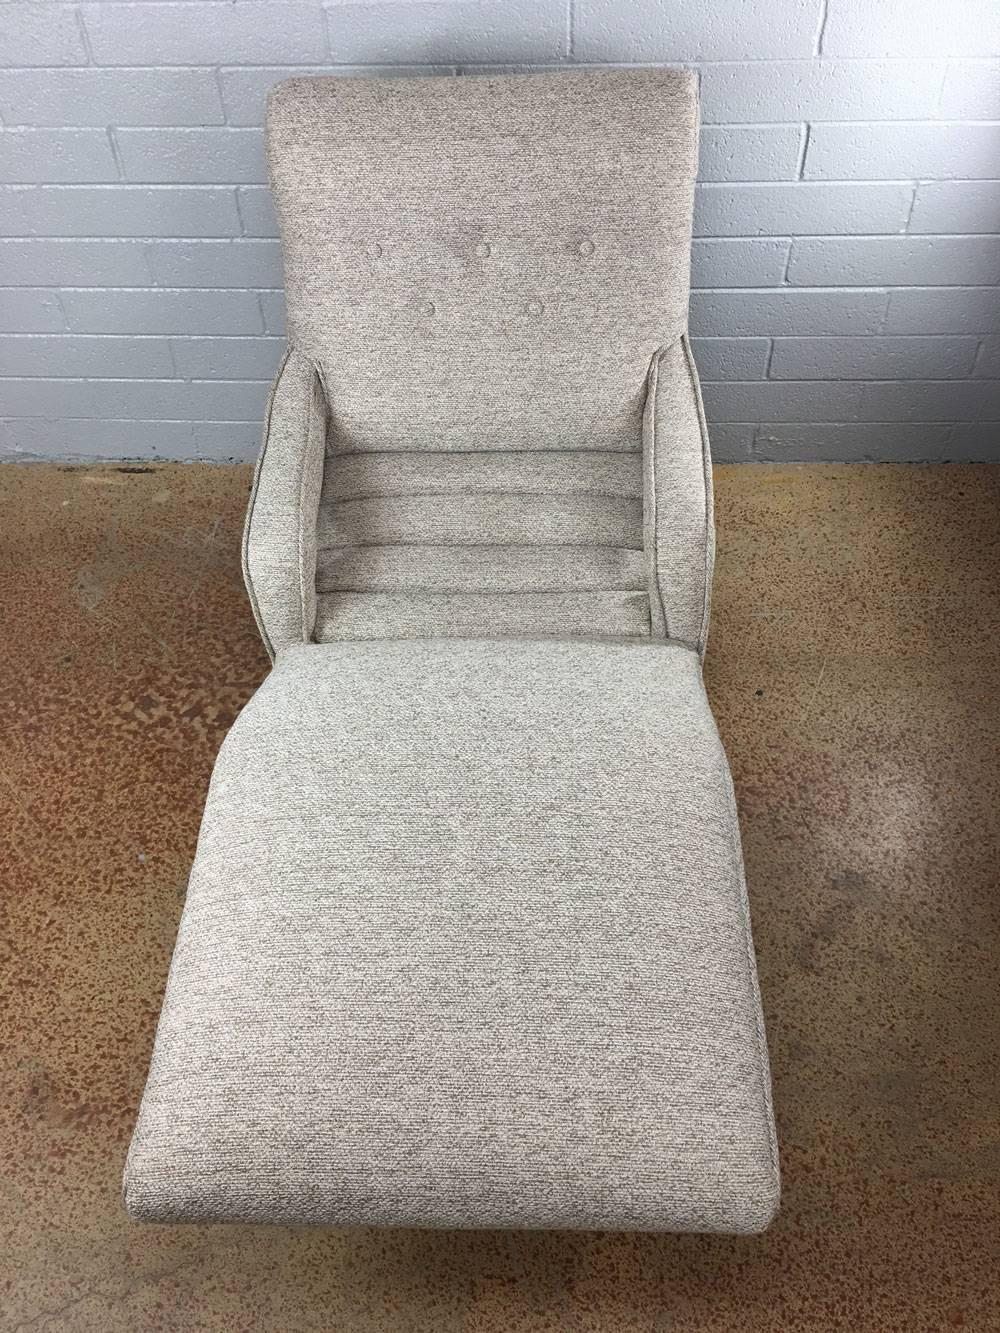 Newly reupholstered and refurbished contour lounge chair, with original nailhead tacks. Manual lever almost effortlessly moves the lounge chair on its ball bearings to the desired position. Note the original metal plate on the backrest. Other